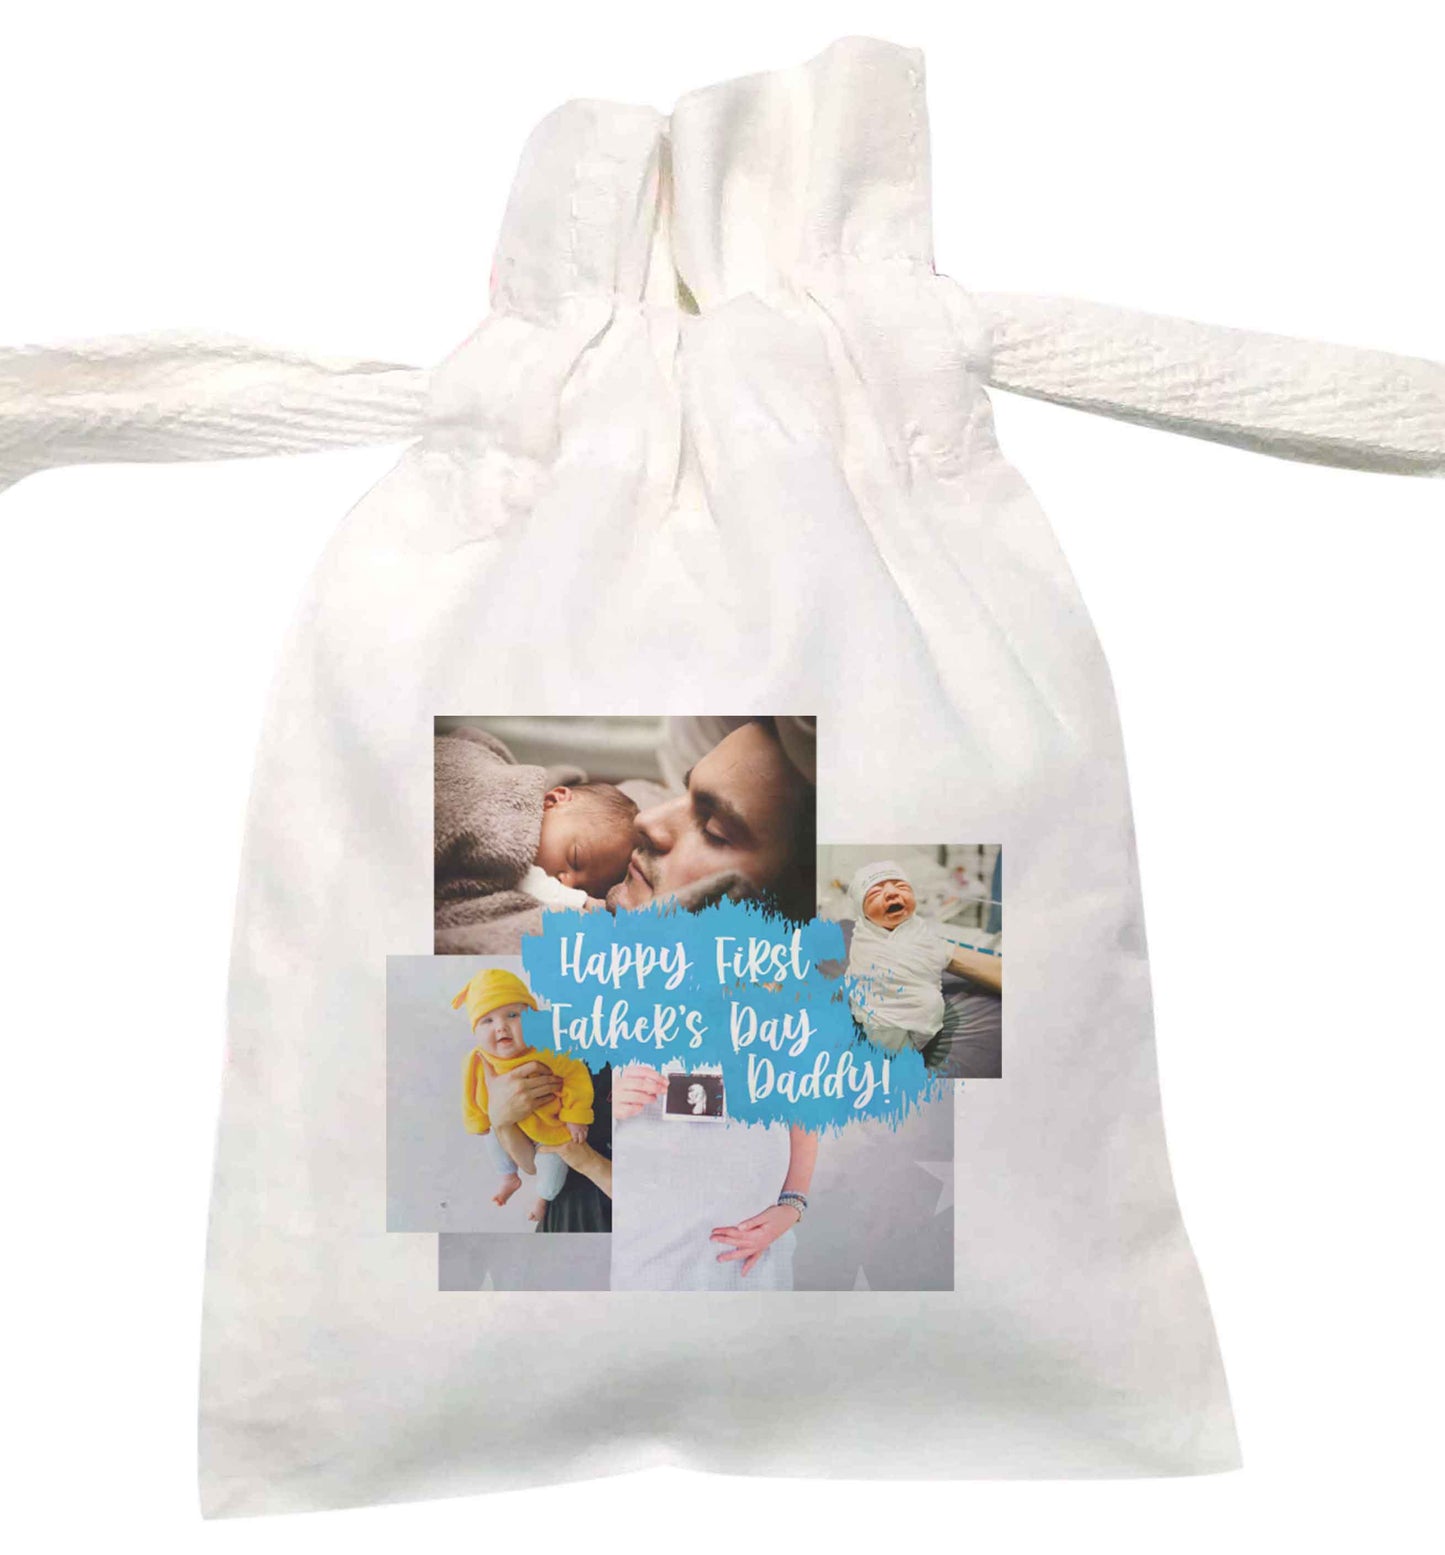 Happy first Father's day photo collage  | XS - L | Pouch / Drawstring bag / Sack | Organic Cotton | Bulk discounts available!